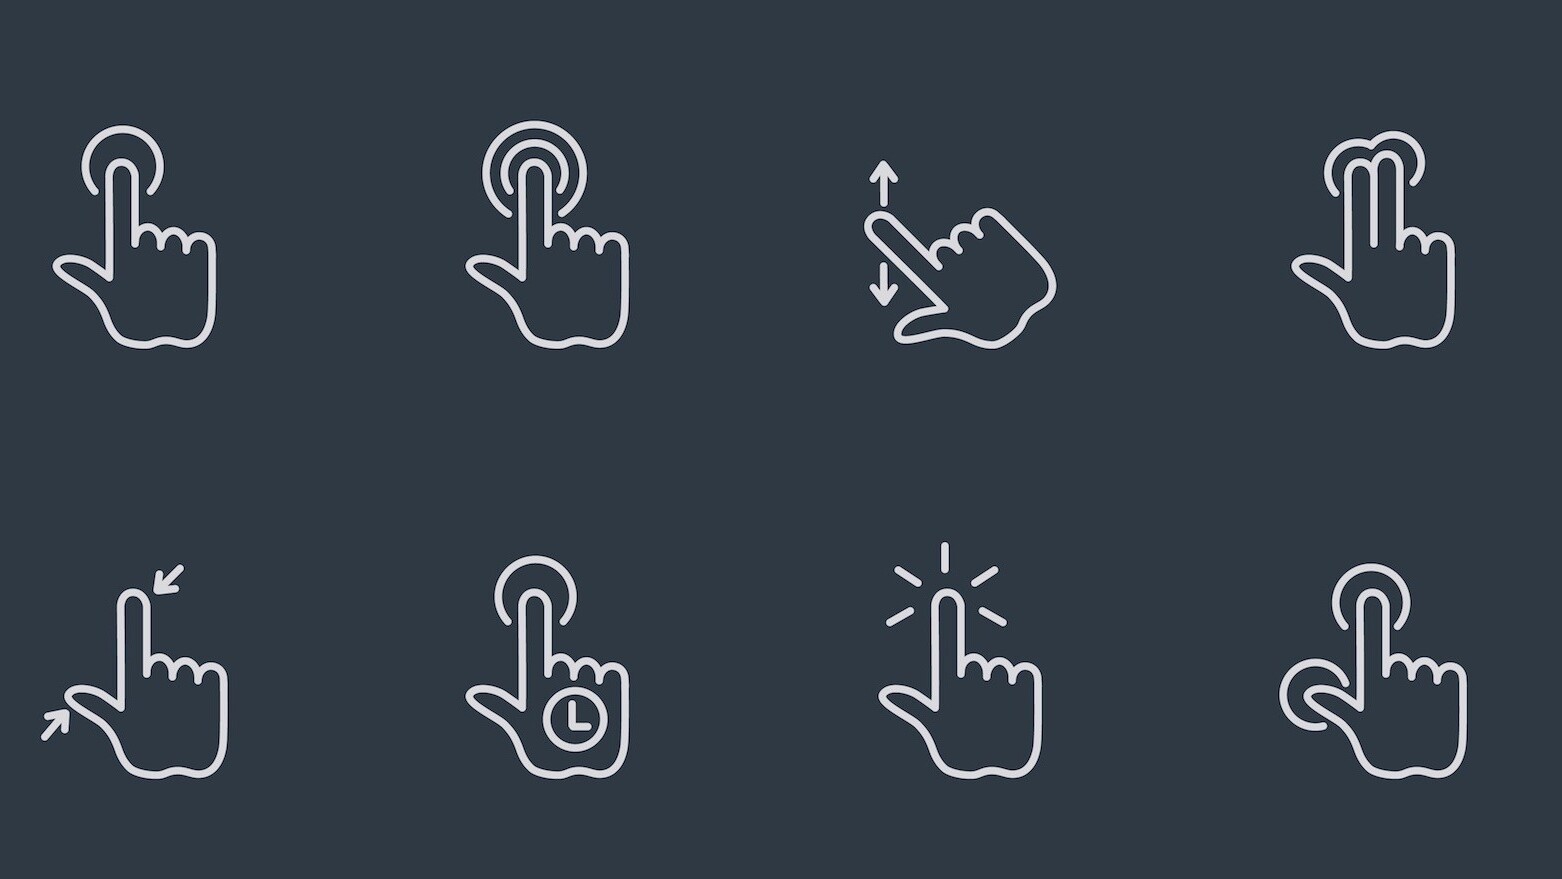 How to implement gestures into your mobile design